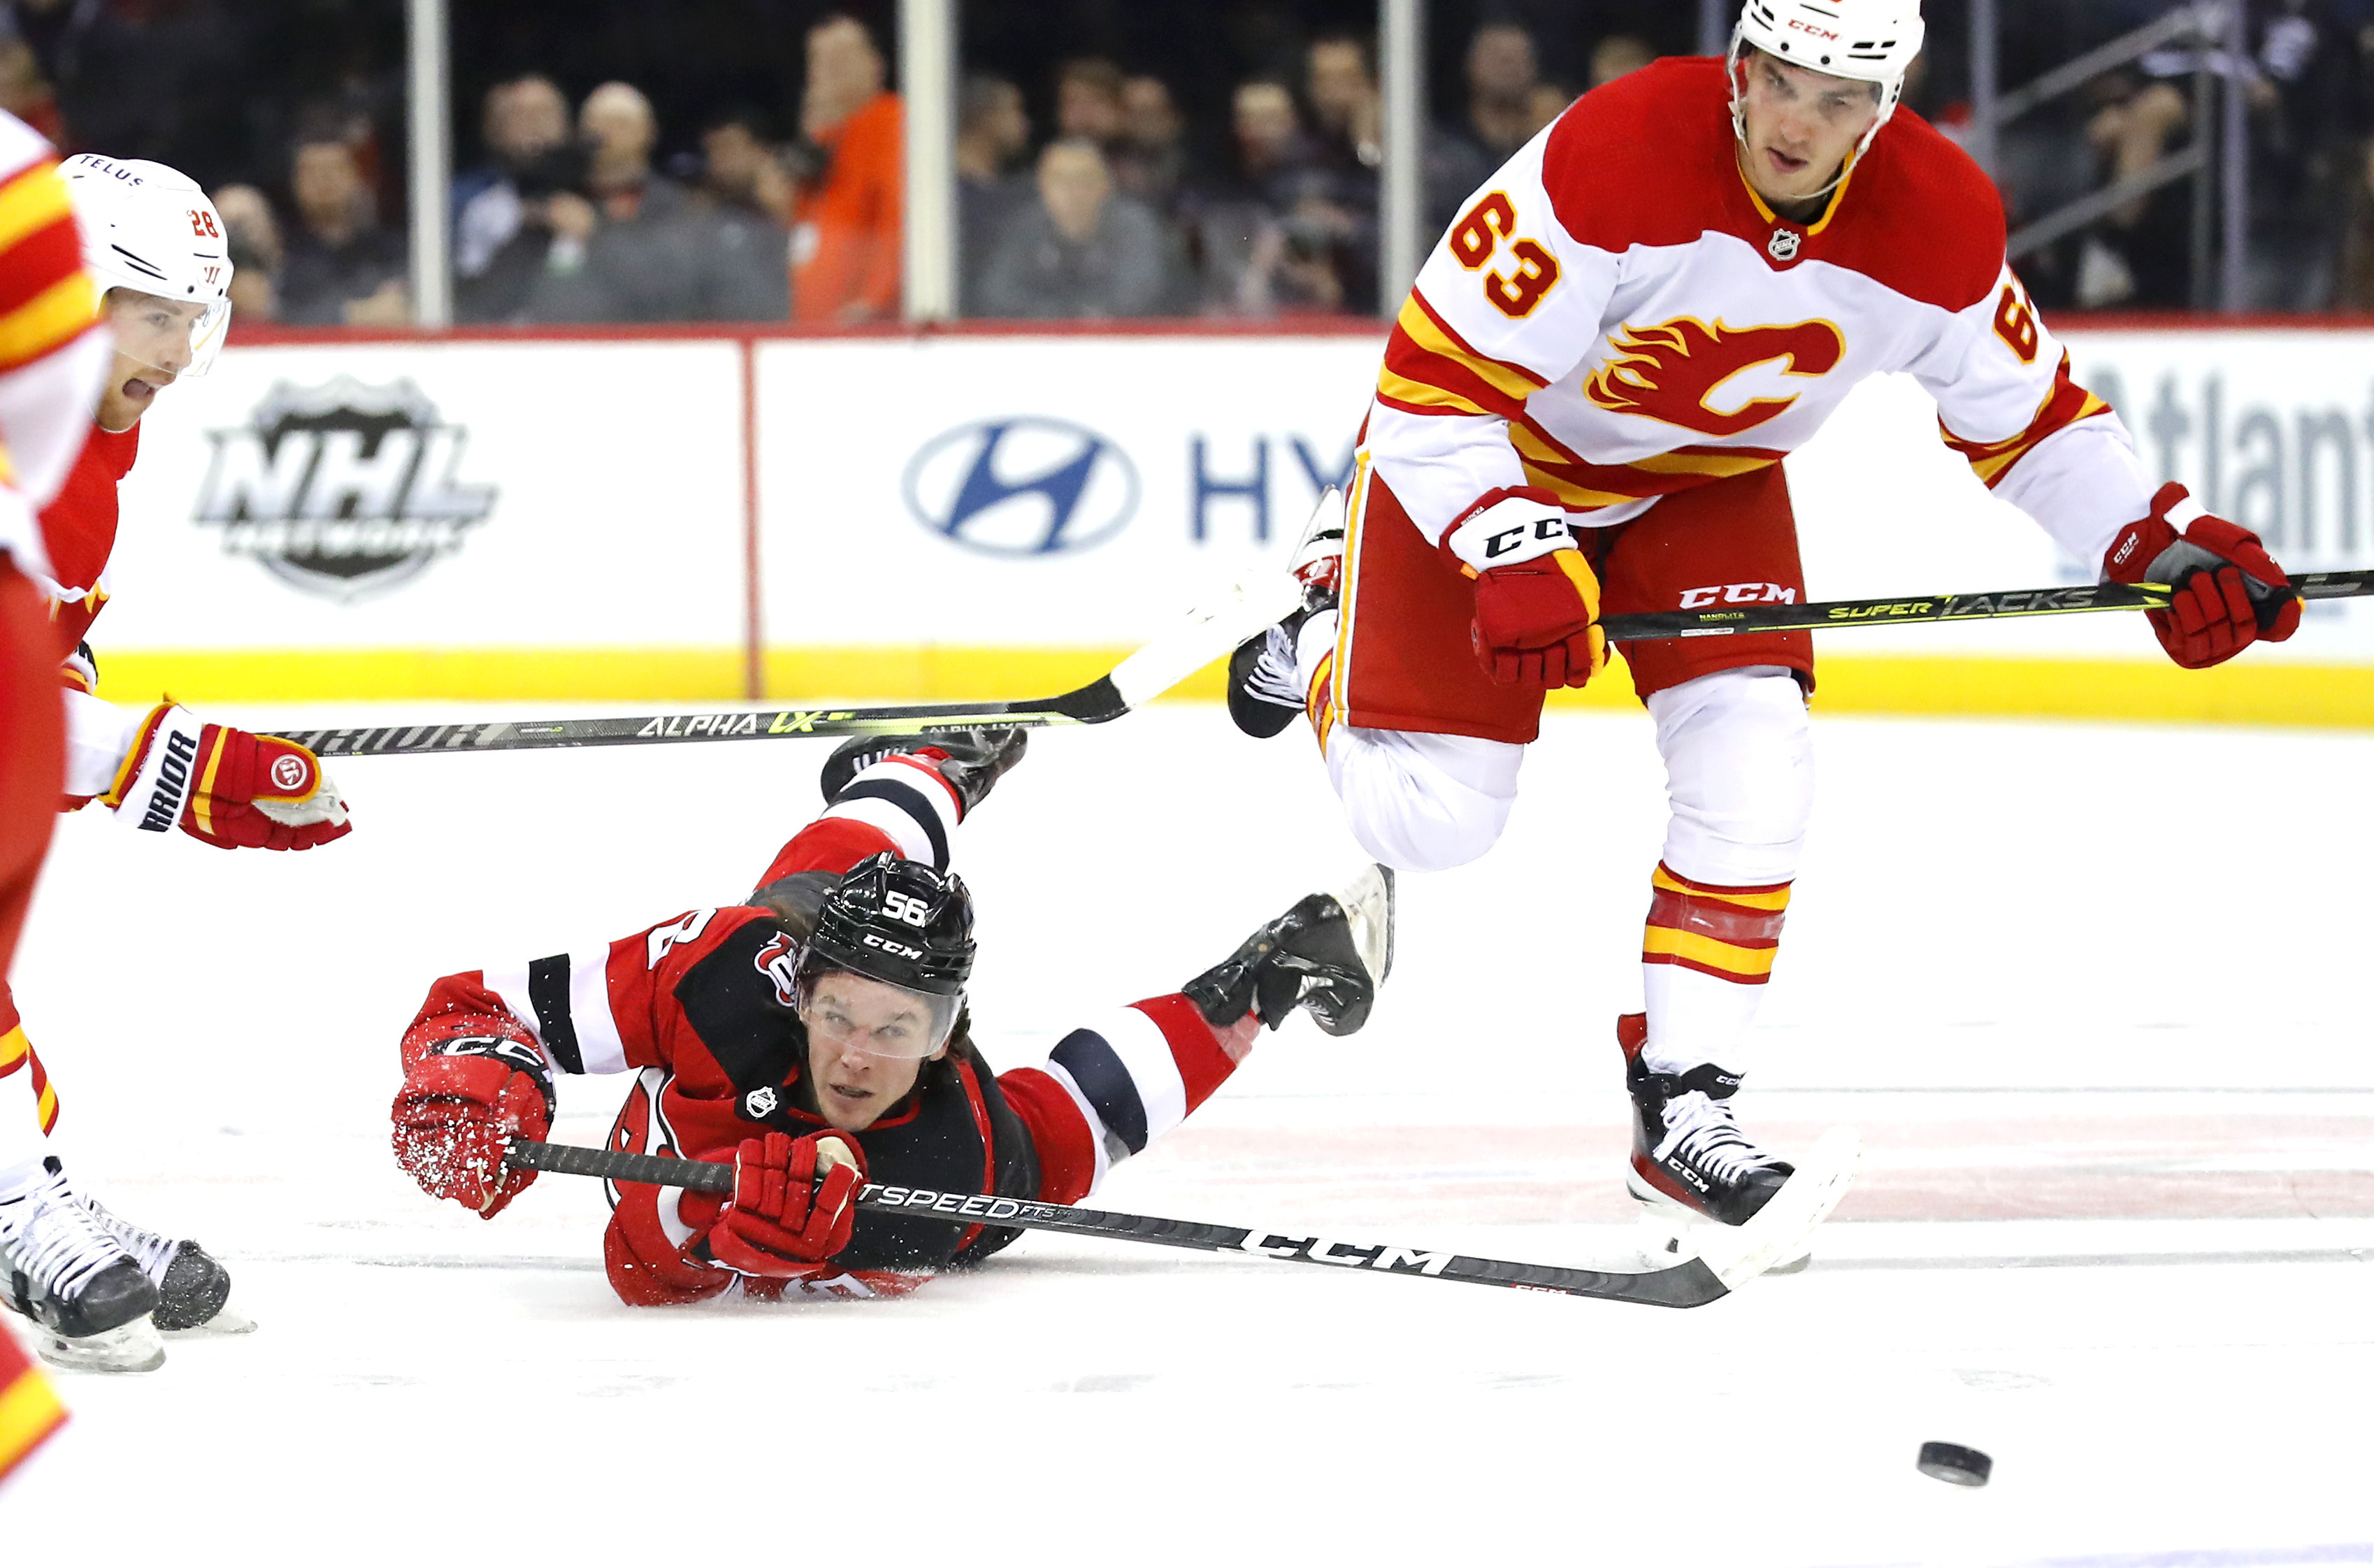 Devils beat Flames for 7th win in a row